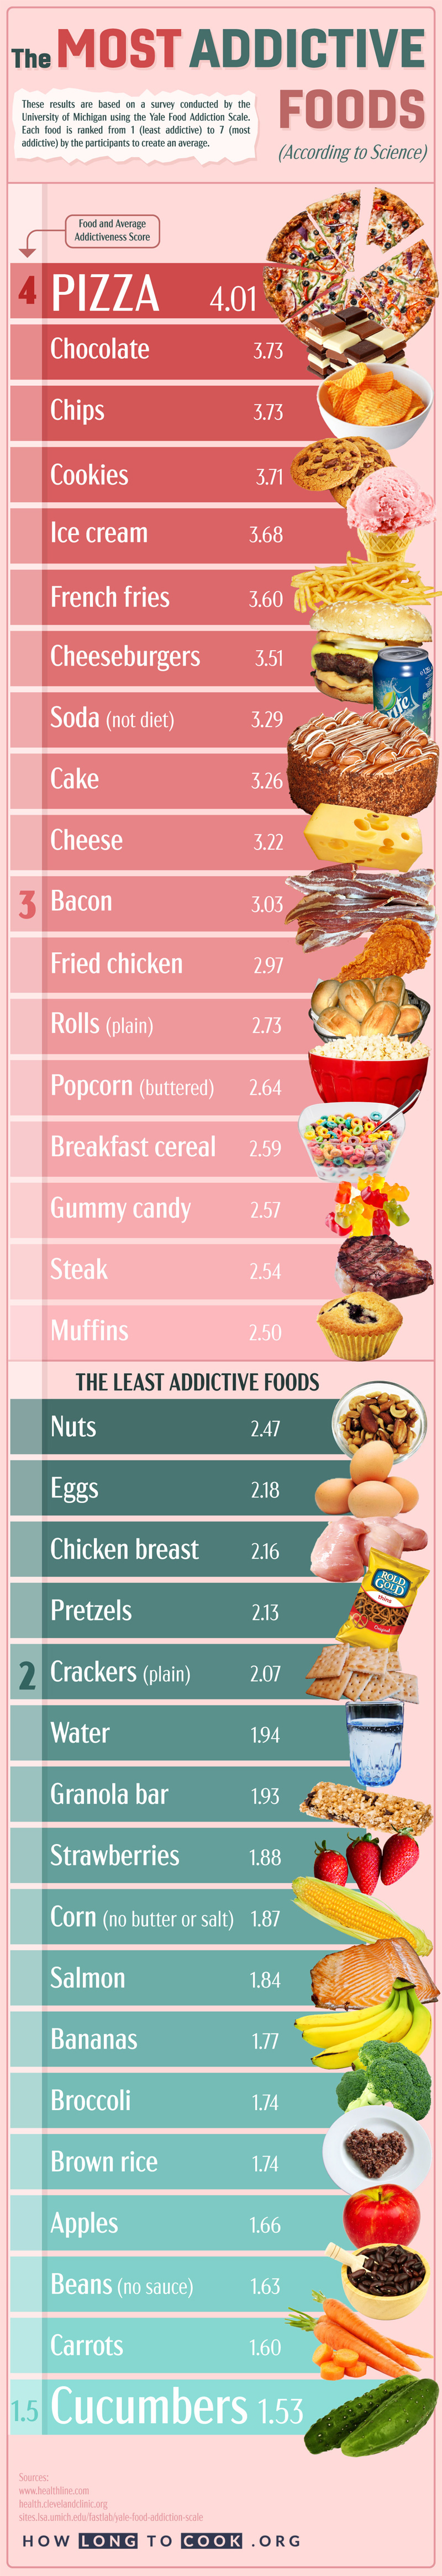 Which Foods Are the Most Addictive? (According to Science)#infographic#food & drink #infographic